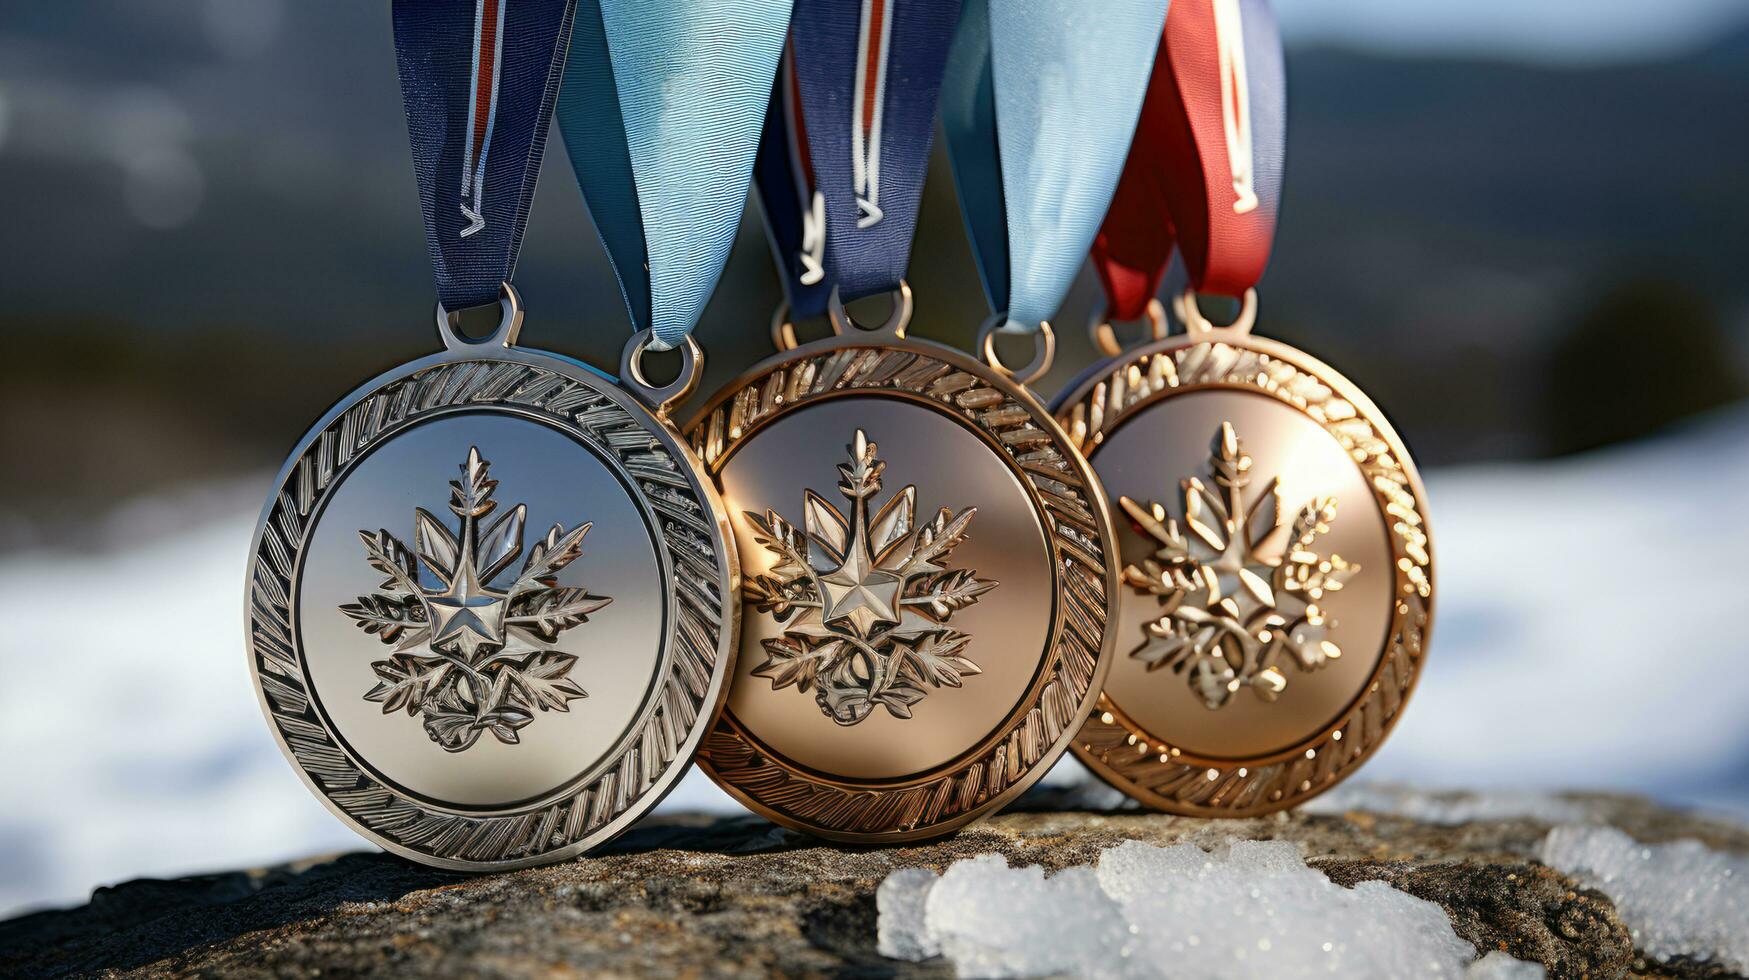 Three medals gold, silver and bronze with ribbons and snowflakes on a log. Winter competitions. photo